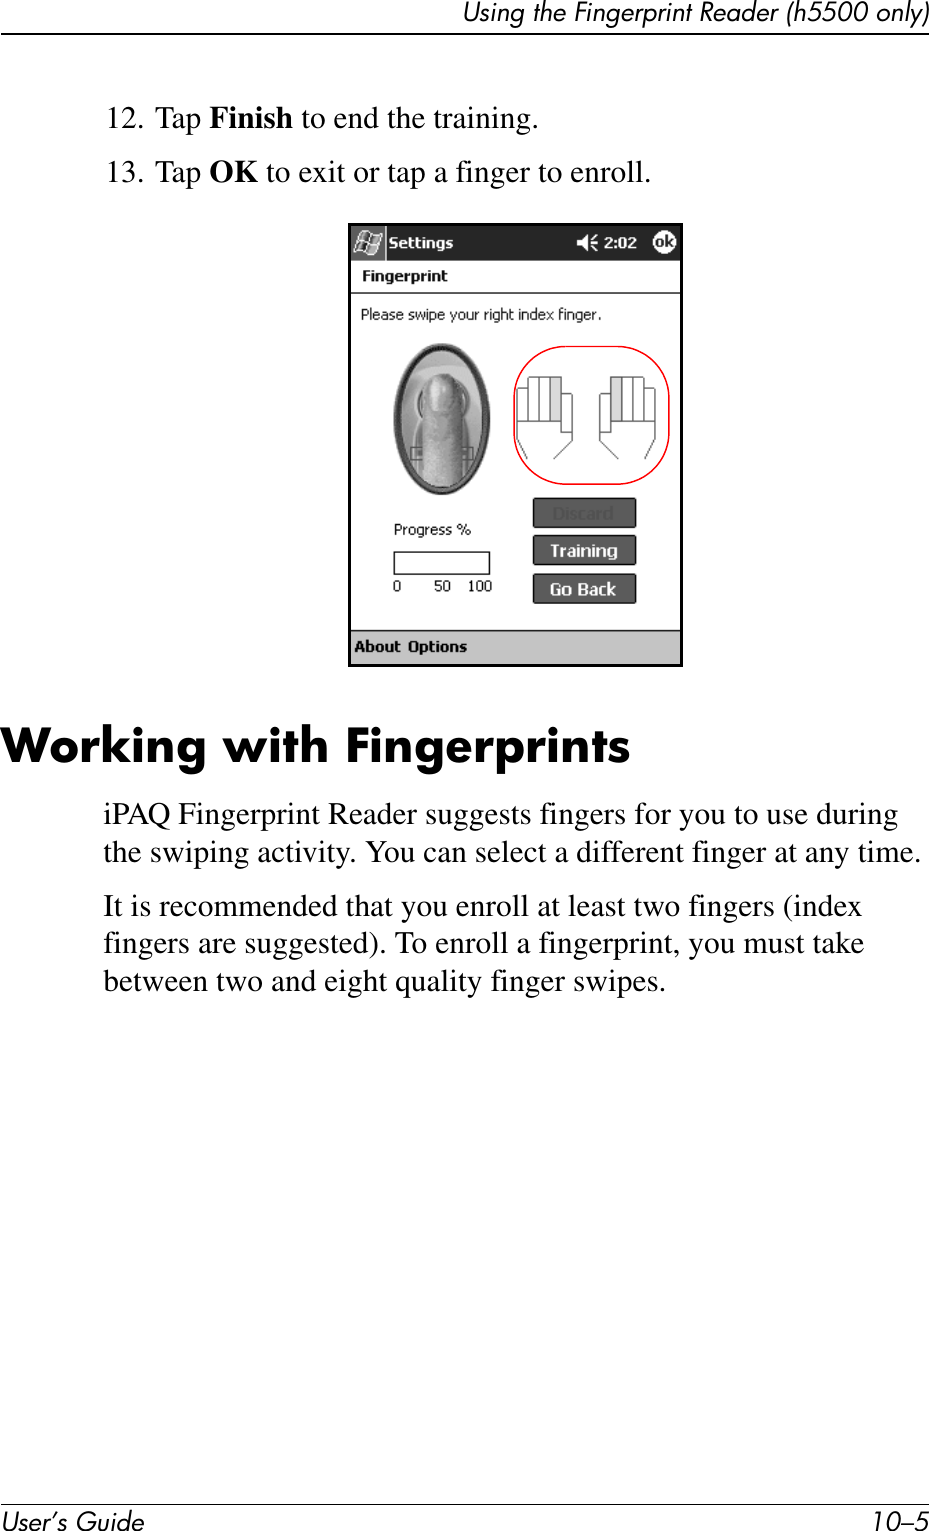 Using the Fingerprint Reader (h5500 only)User’s Guide 10–512. Tap Finish to end the training.13. Tap OK to exit or tap a finger to enroll.Working with FingerprintsiPAQ Fingerprint Reader suggests fingers for you to use during the swiping activity. You can select a different finger at any time.It is recommended that you enroll at least two fingers (index fingers are suggested). To enroll a fingerprint, you must take between two and eight quality finger swipes.